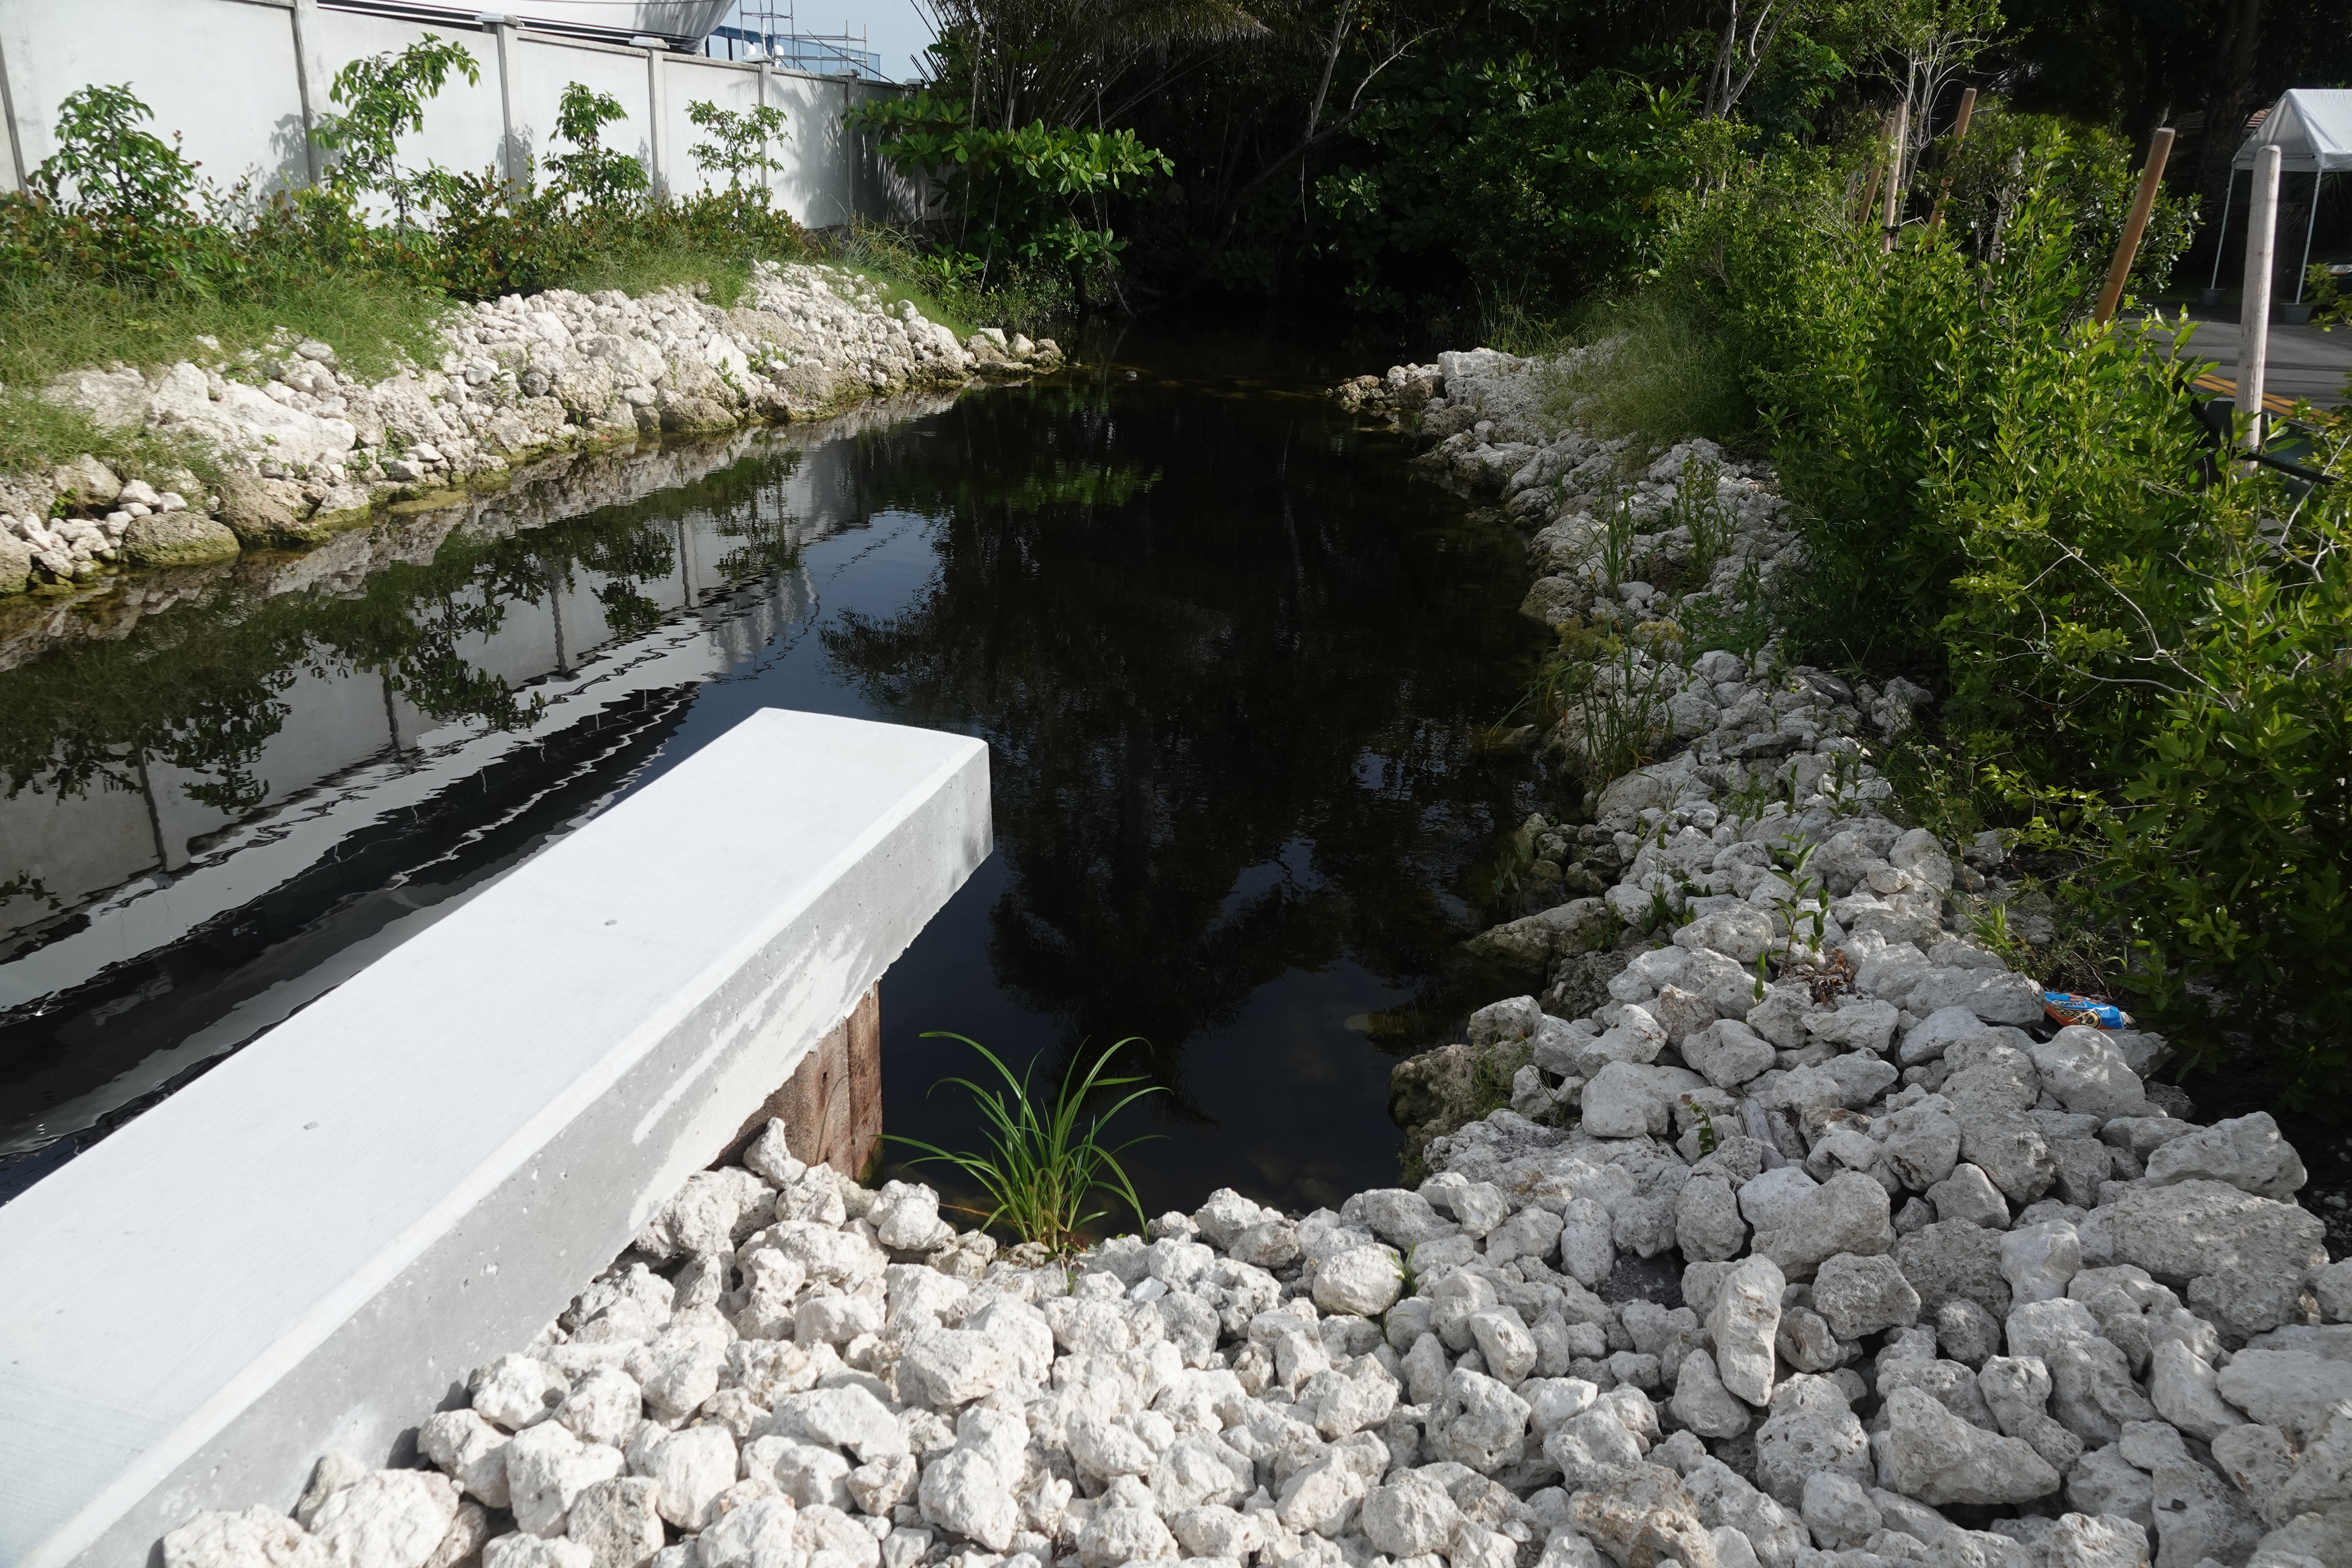 Fort Lauderdale and a drainage contractor have agreed to pay more than $175,000 to settle a county fine for unauthorized activities that included dumping gravel into this canal in River Oaks. (Joe Cavaretta/South Florida Sun Sentinel)